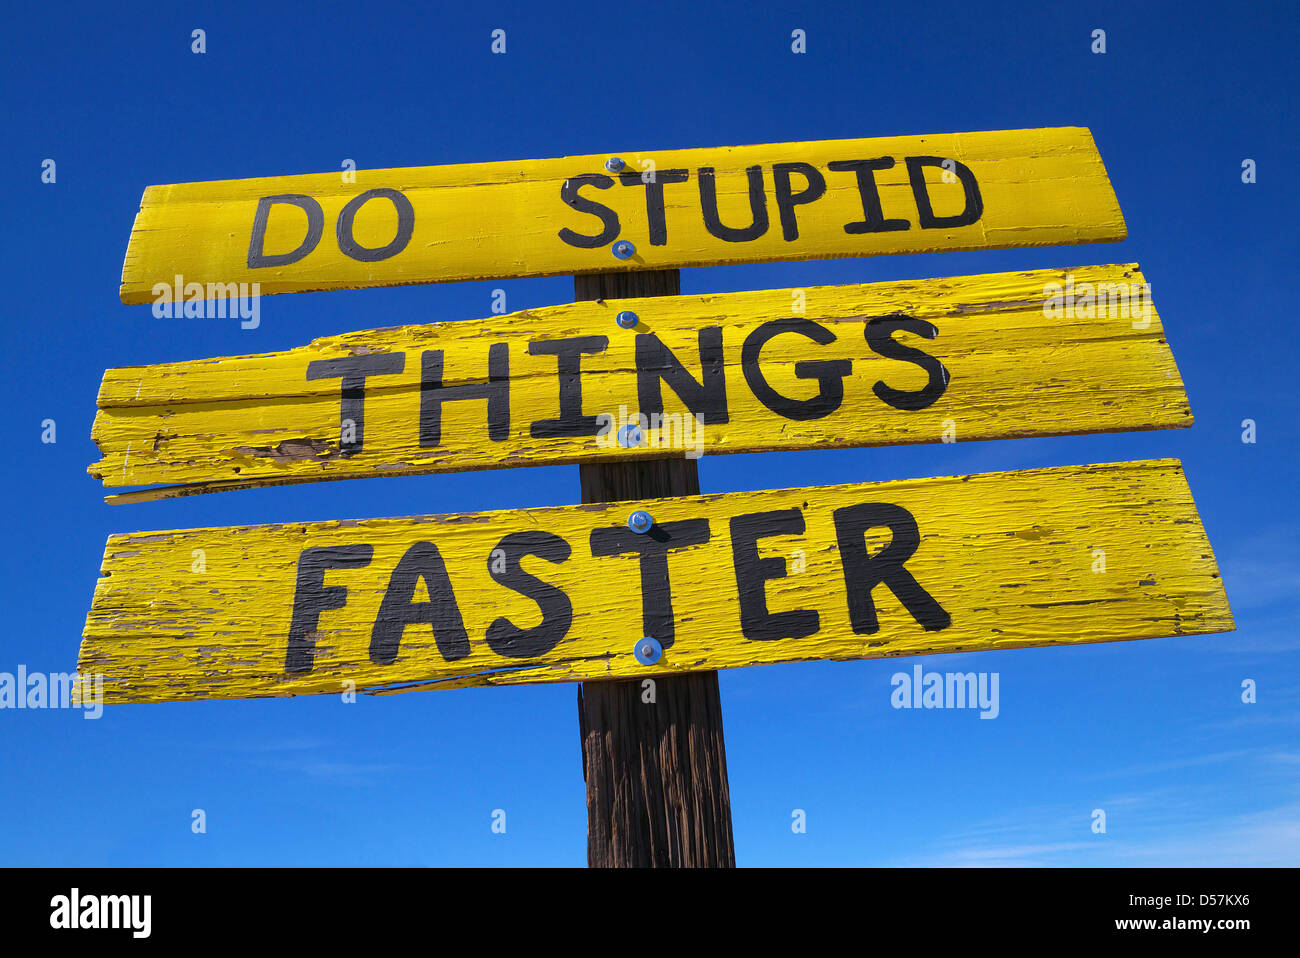 Do Stupid Things Faster sign Stock Photo